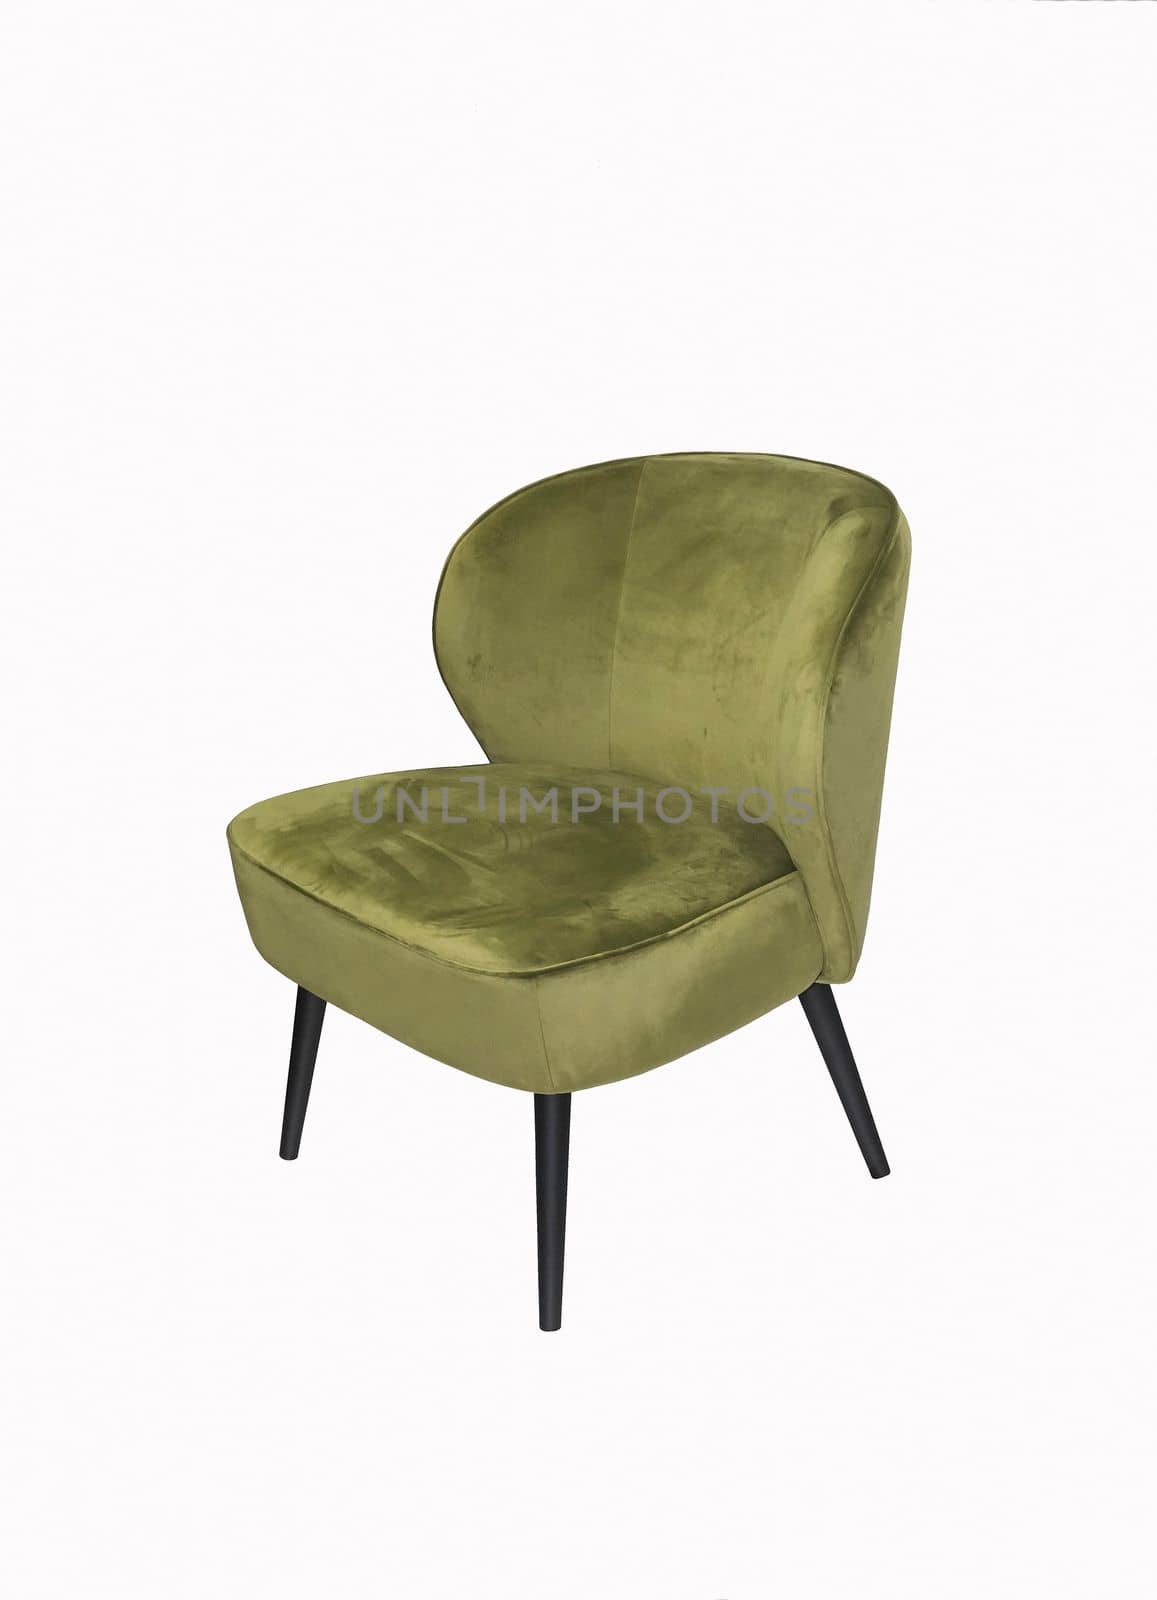 Comfortable velours olive armchair on white background. Interior element